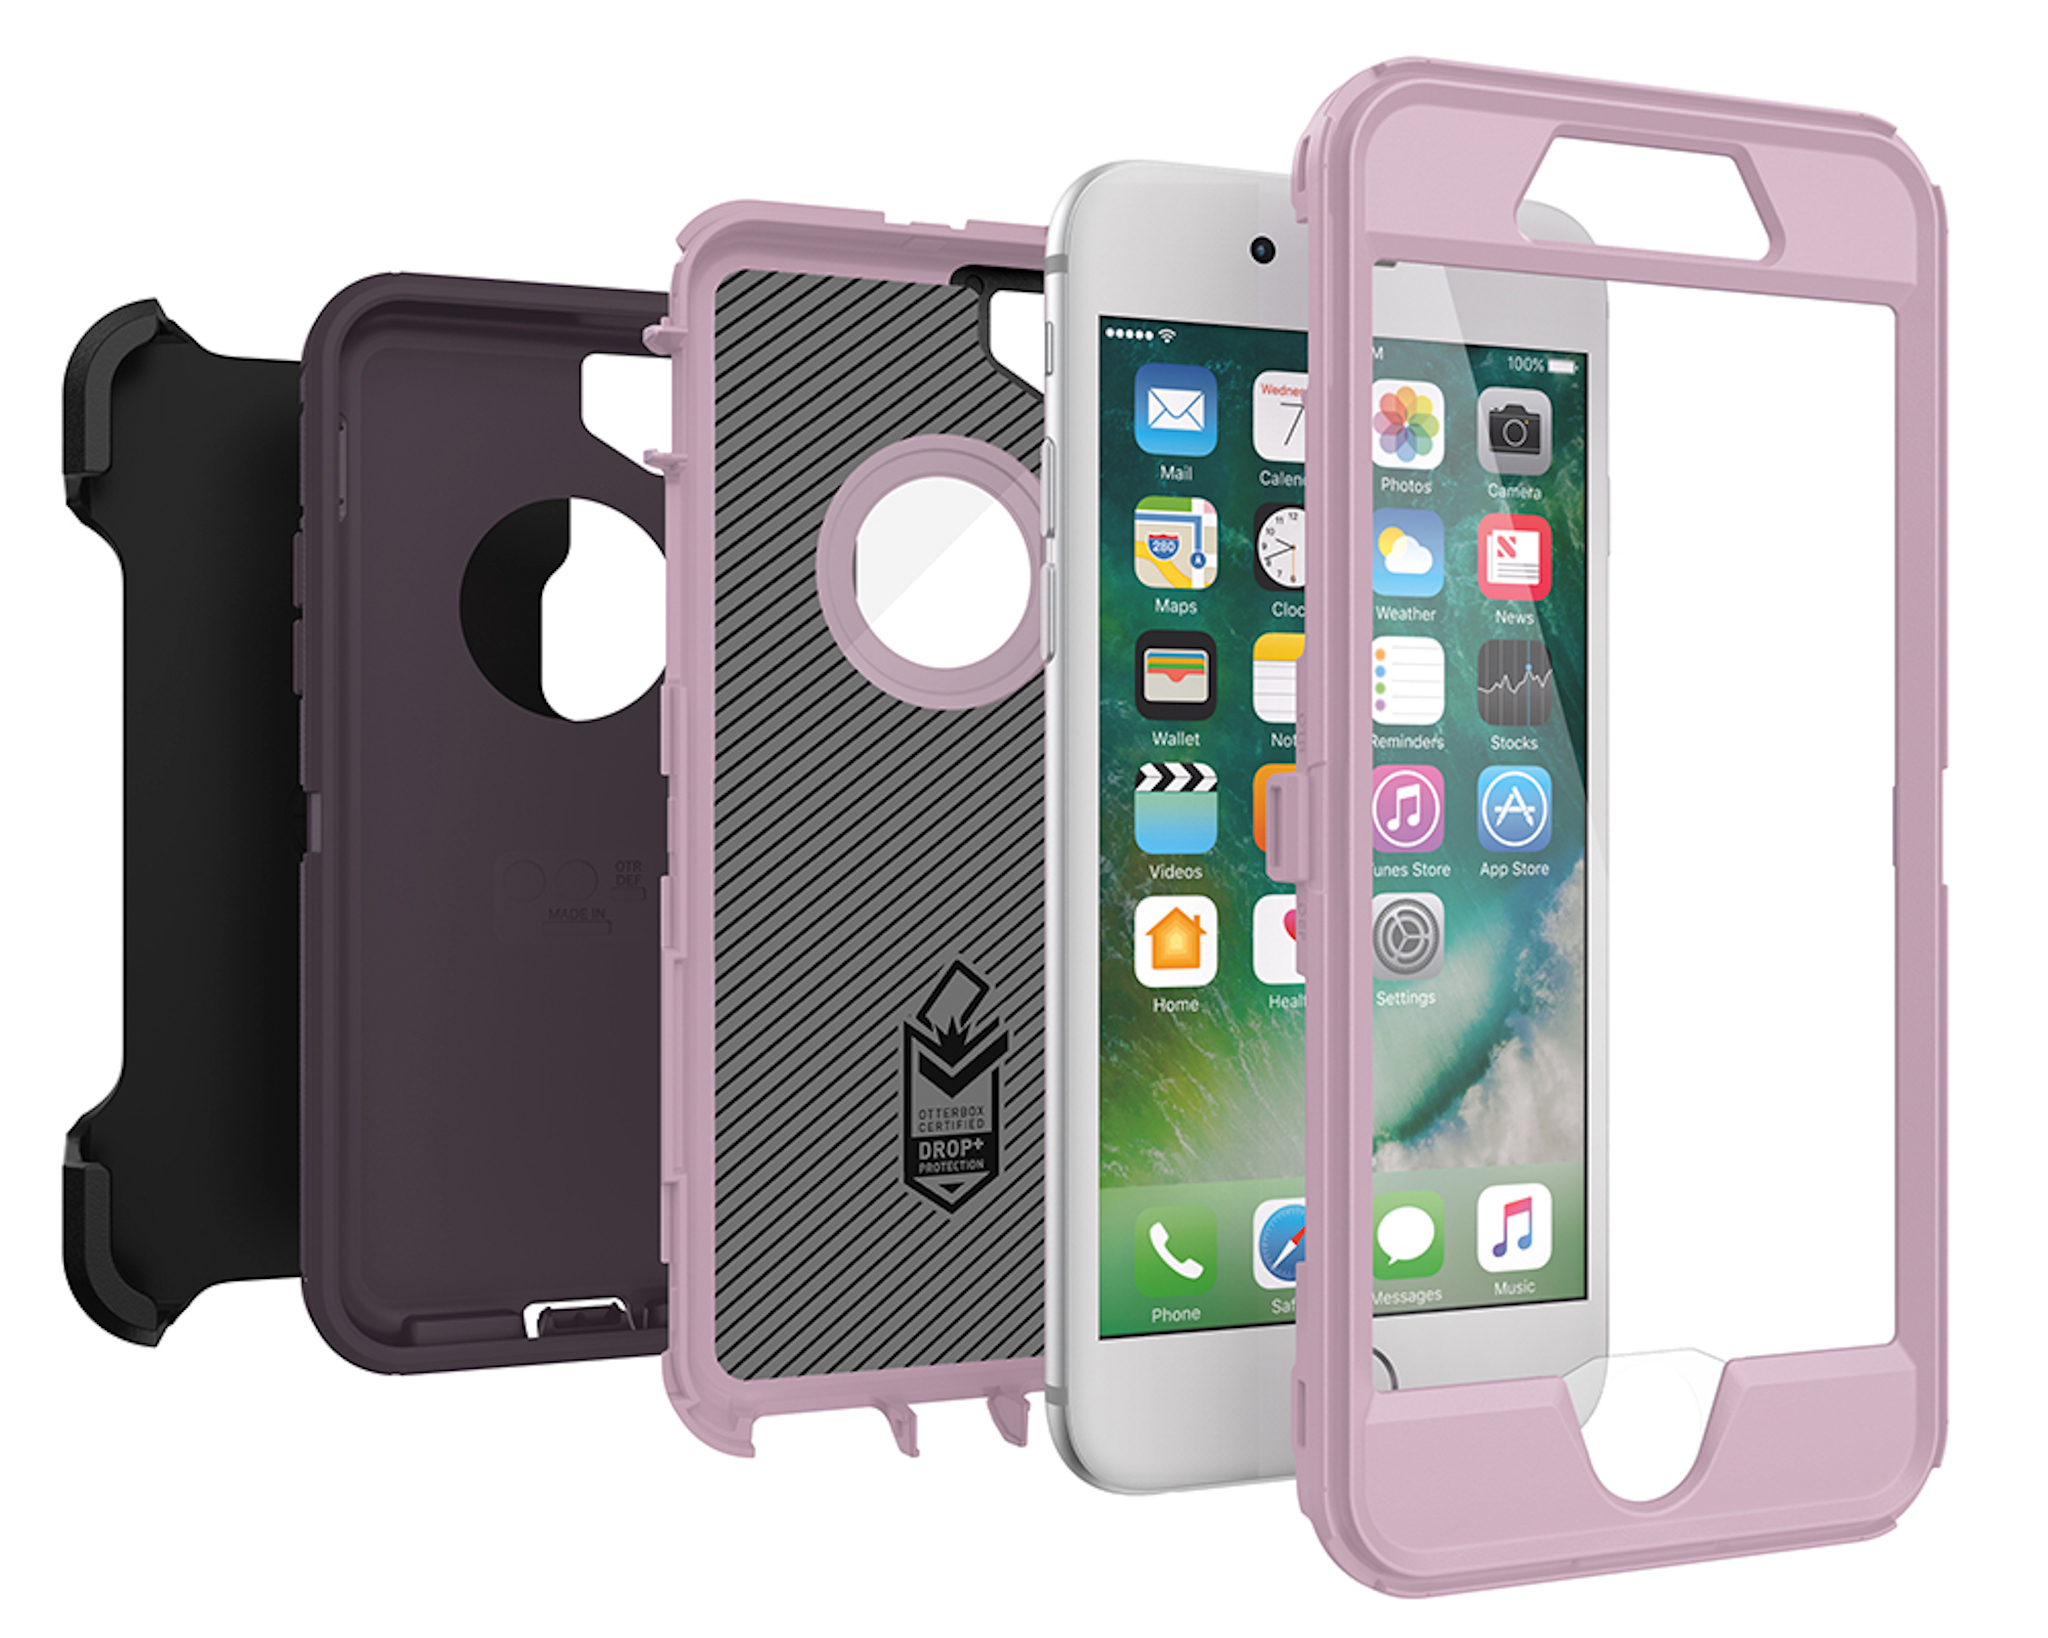 New arrival OtterBox phone cases for iPhone X, iPhone 8 & iPhone 8